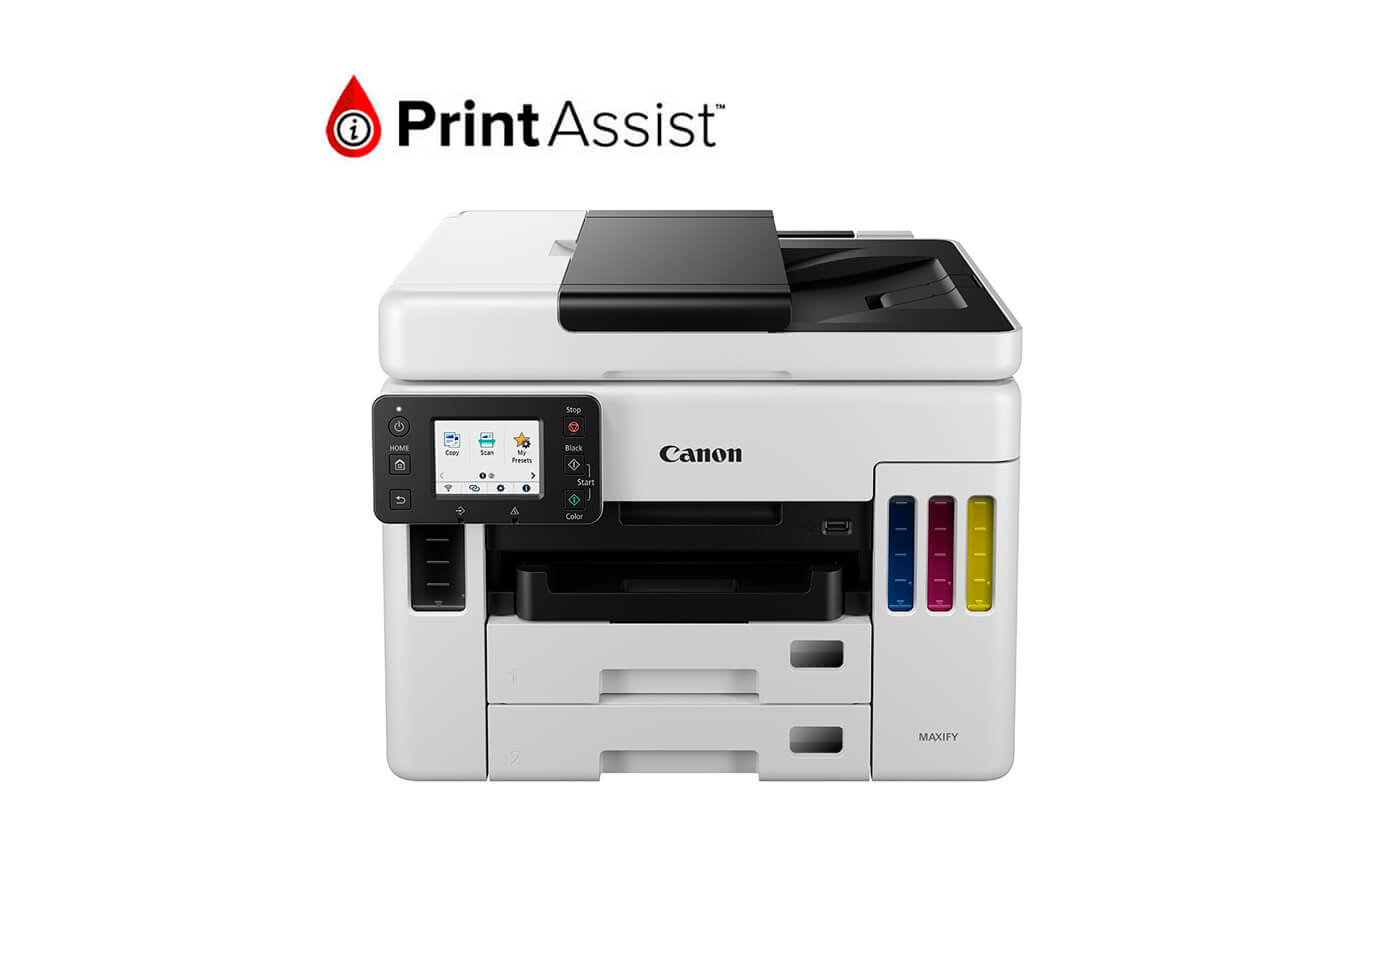 Product image of MAXIFY GX7060 MegaTank office printer with print assist